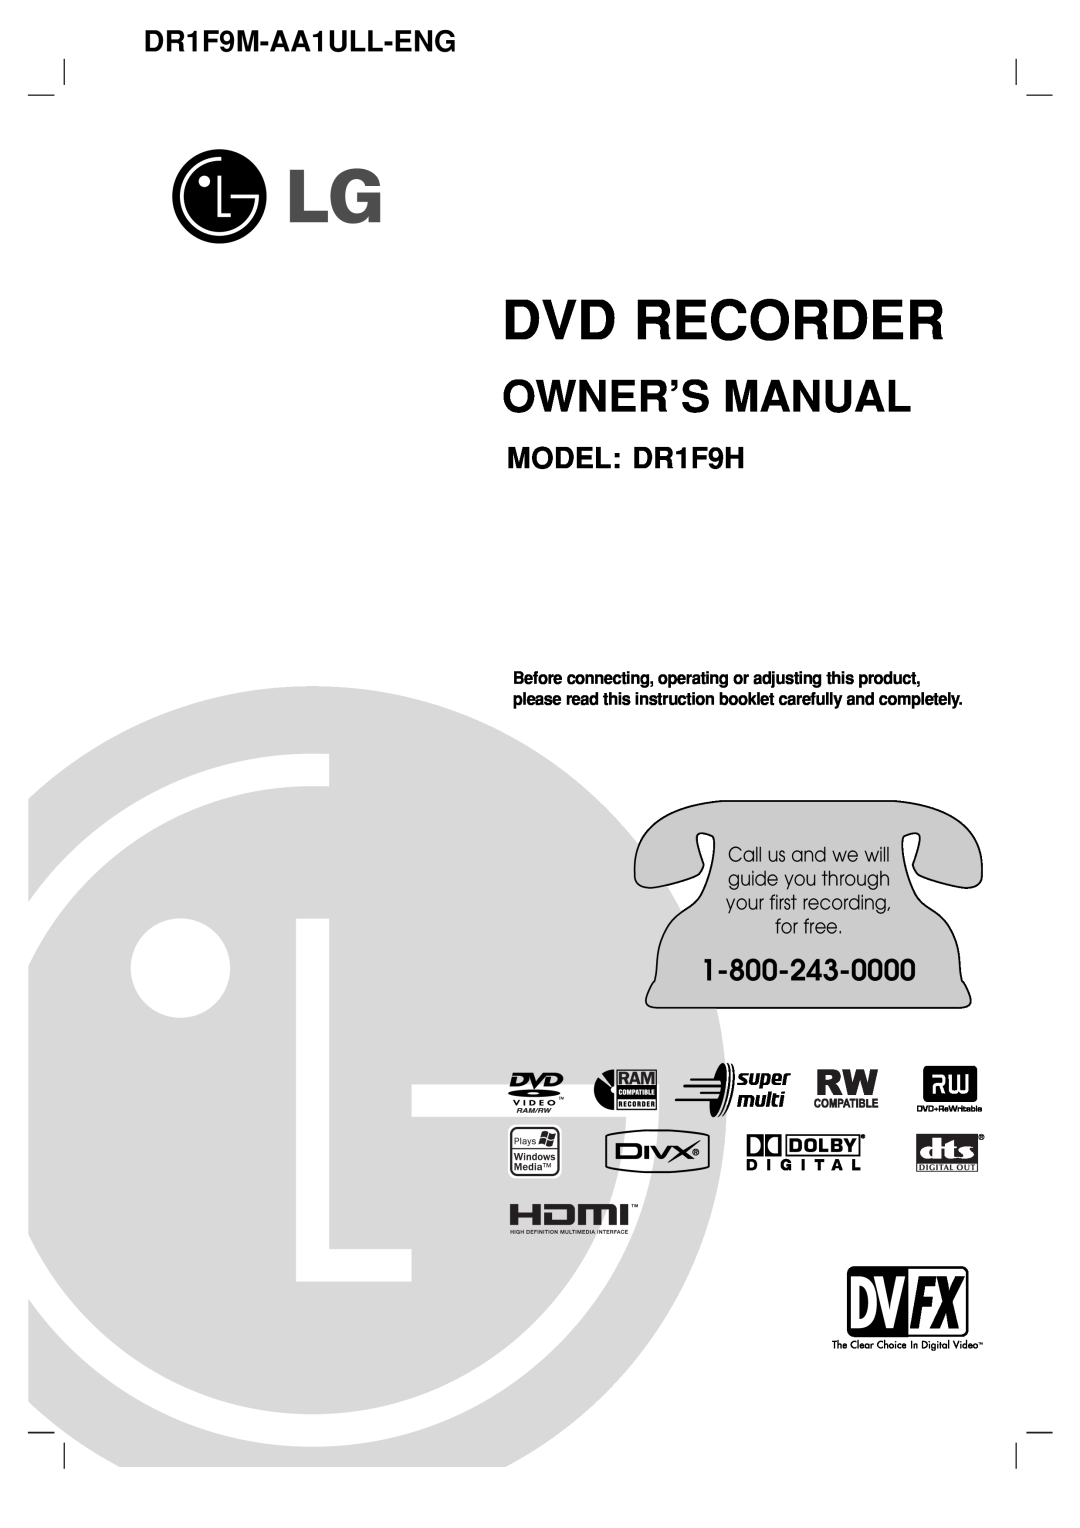 LG Electronics owner manual Owner’S Manual, Dvd Recorder, DR1F9M-AA1ULL-ENG, MODEL DR1F9H 